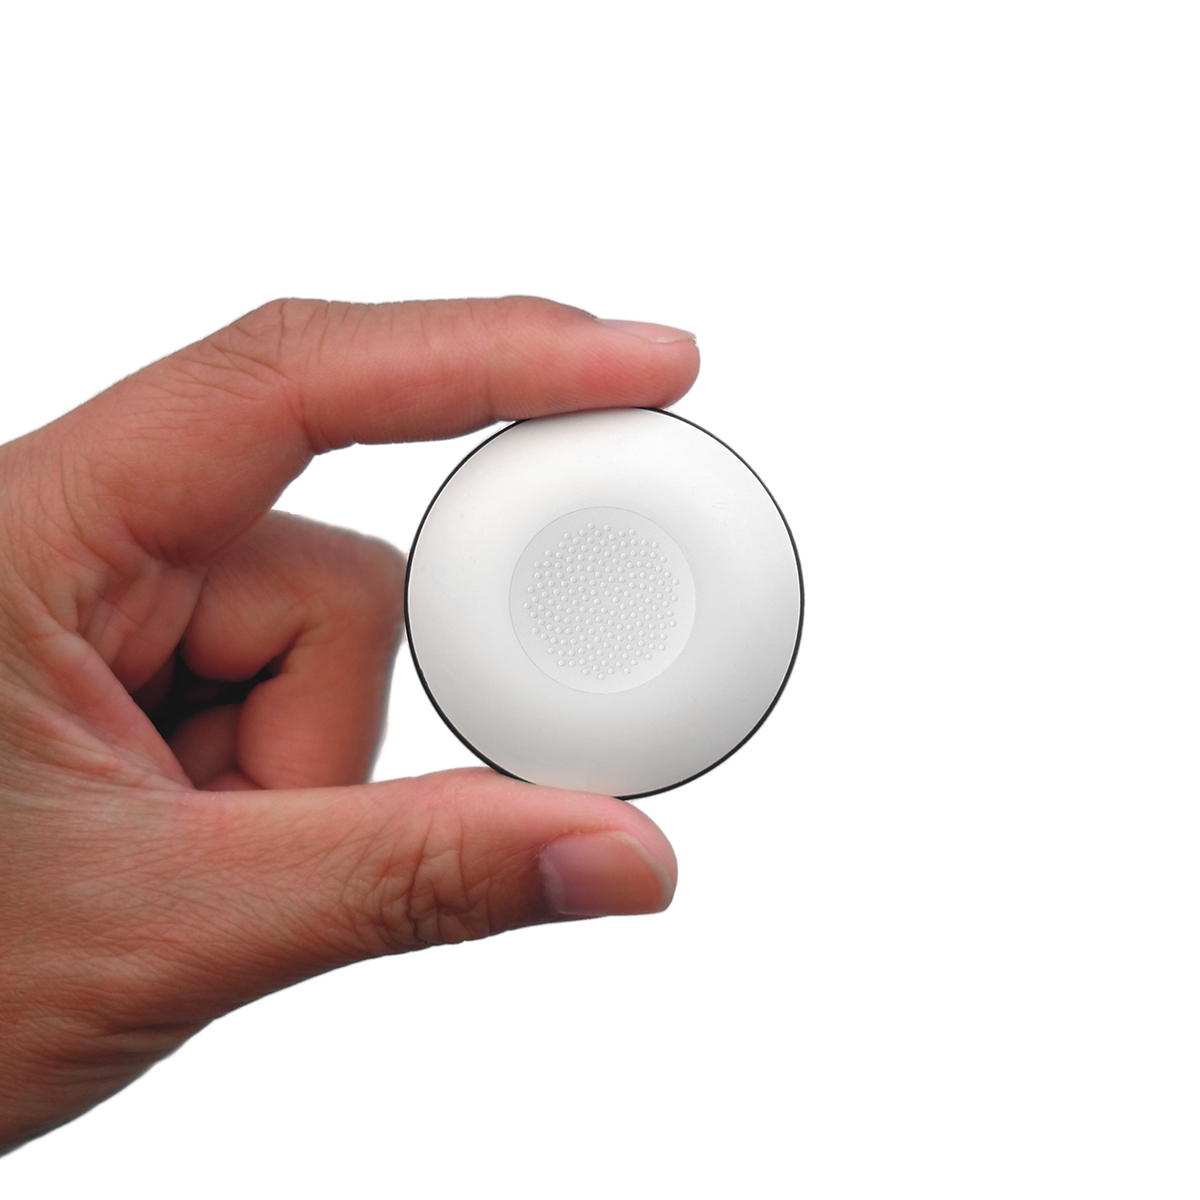 connected Wearable alert button Health security service